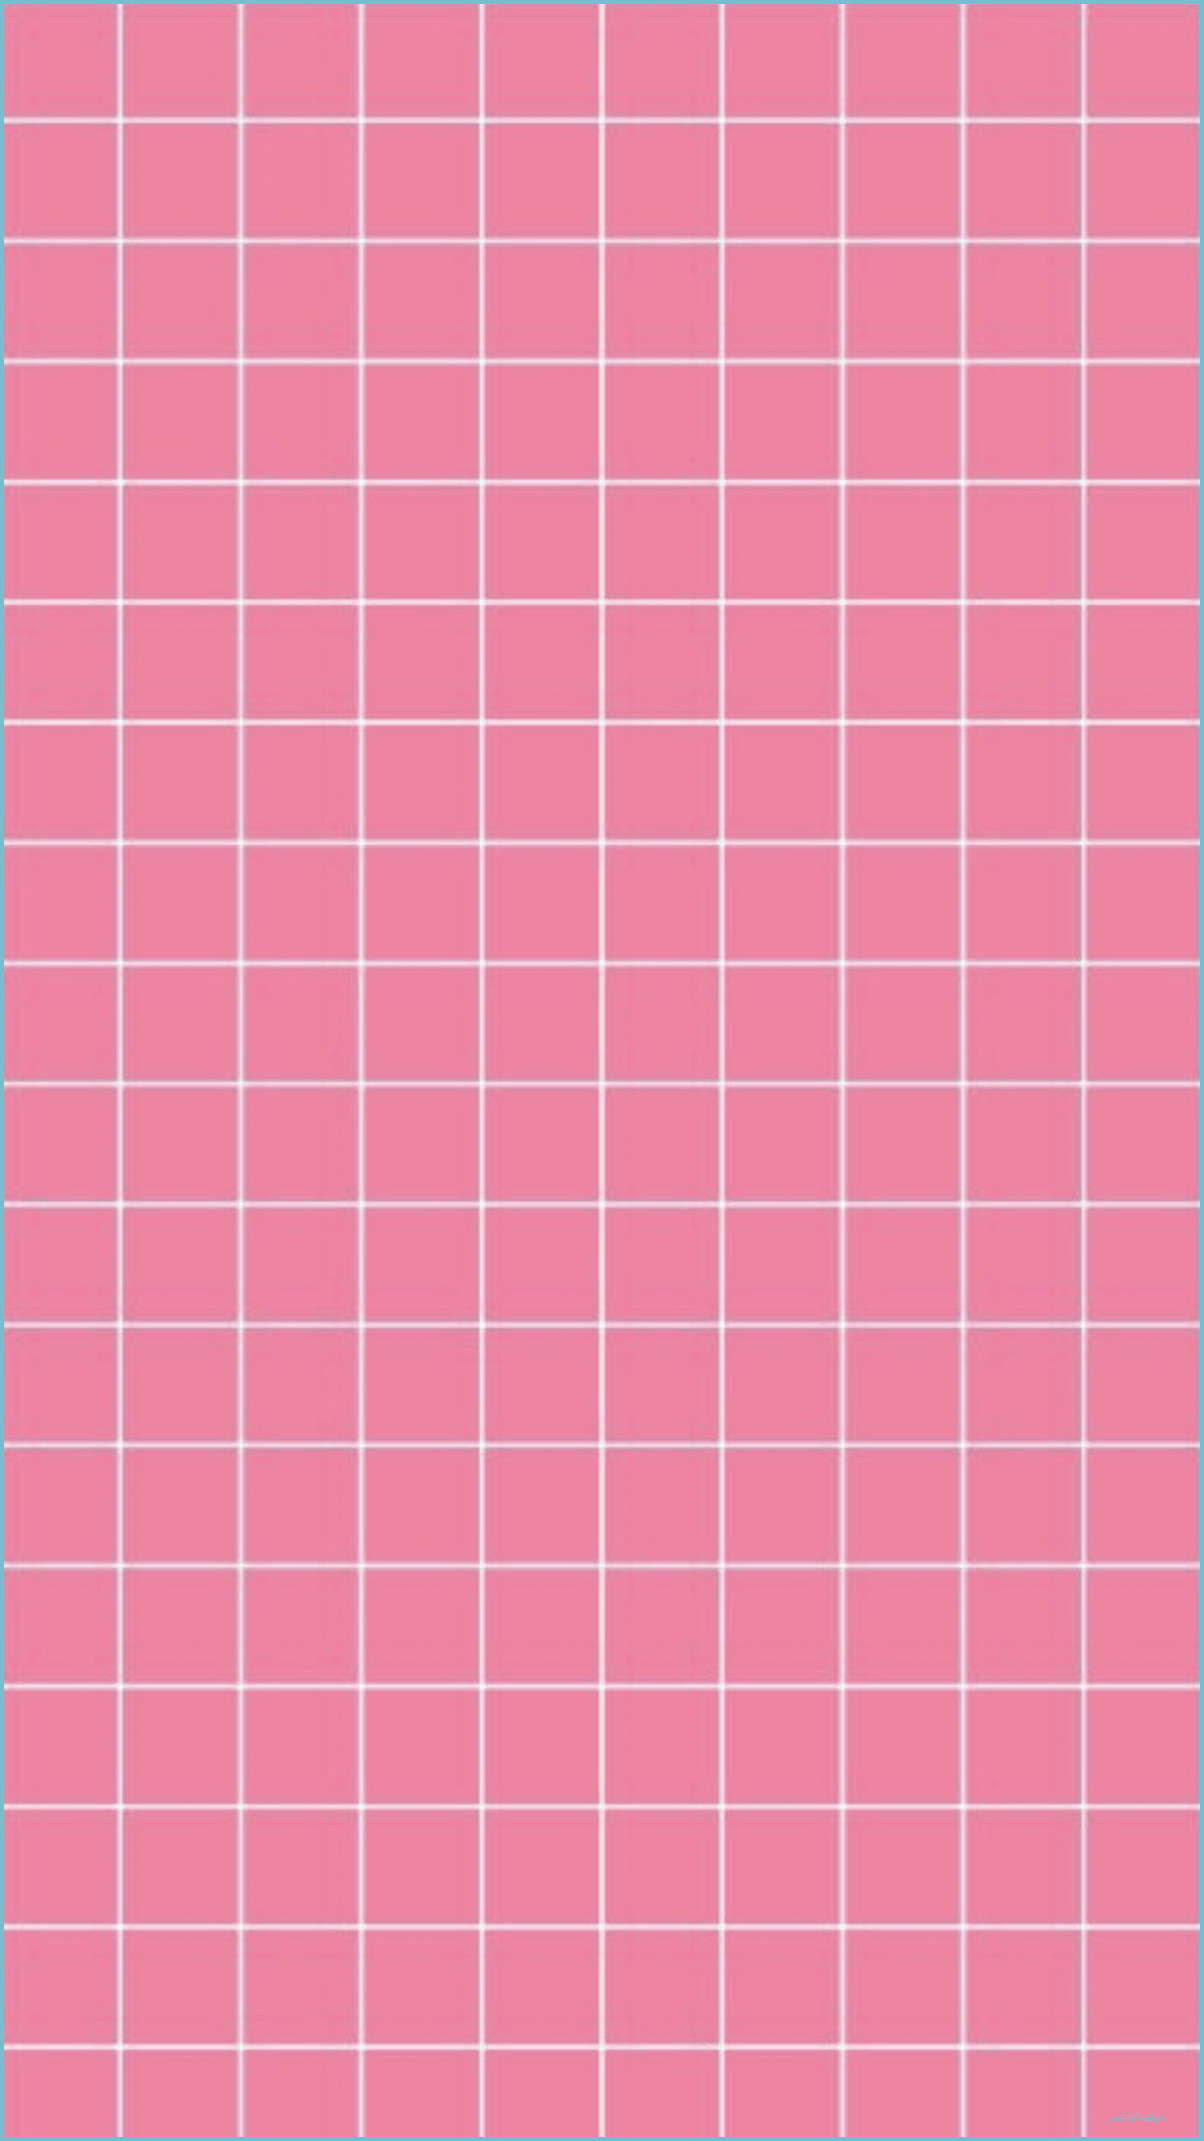 Pink grid background with a blue border - Grid